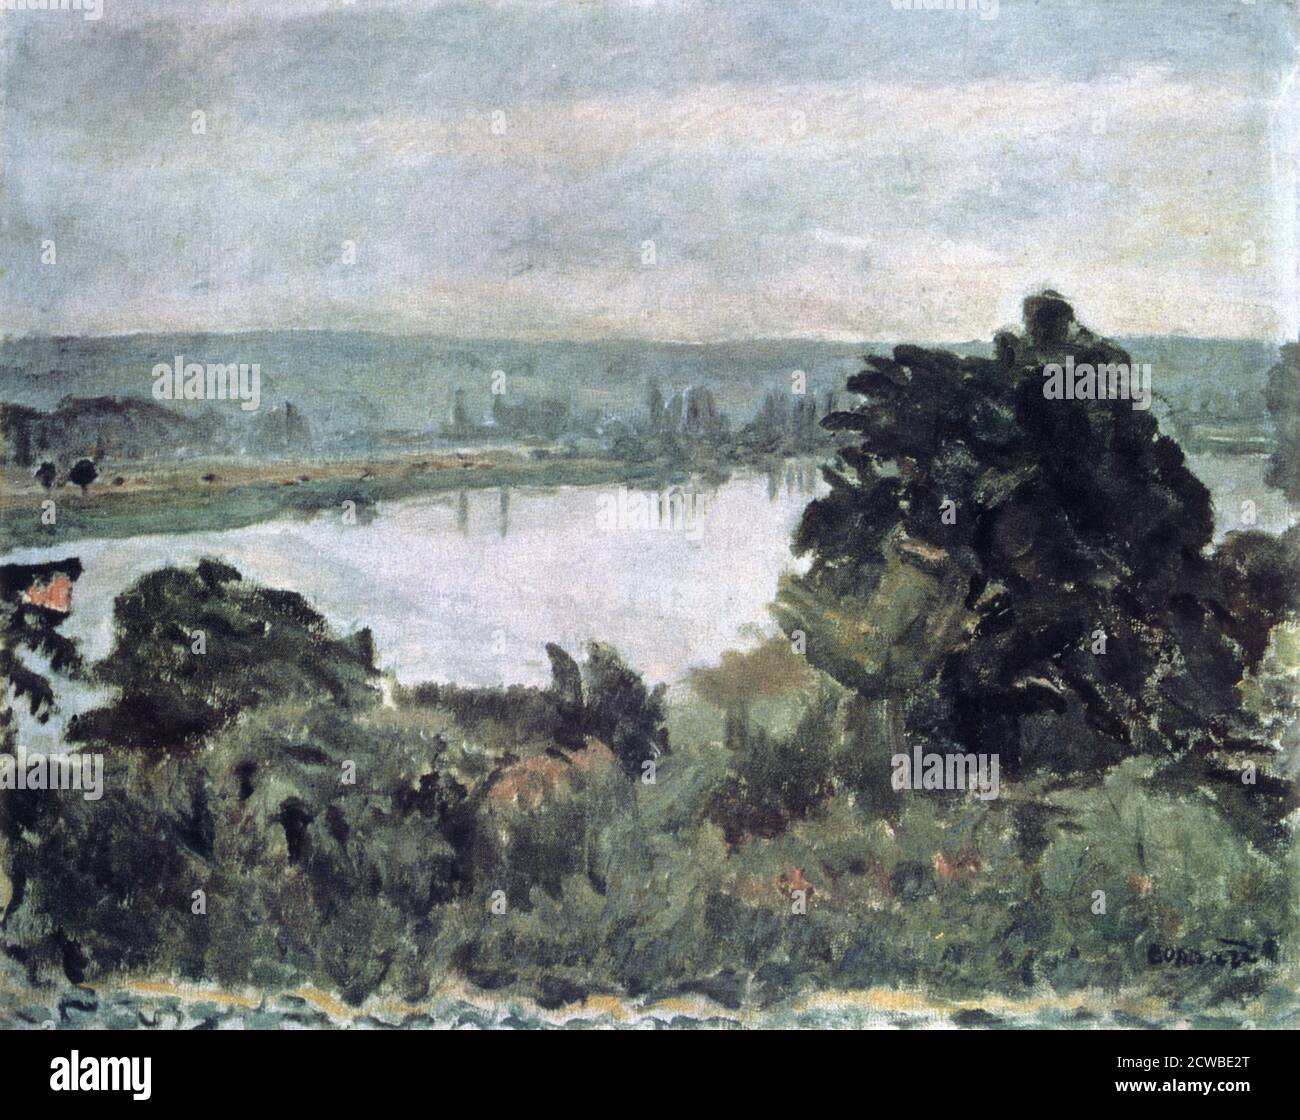 The Seine near Vernon', c1911. Artist: Pierre Bonnard. Bonnard was a French painter, illustrator, and printmaker, known for the stylized decorative qualities of his paintings and his bold use of colour. He was a founding member of the Post-Impressionist group of avant-garde painters Les Nabis. Stock Photo